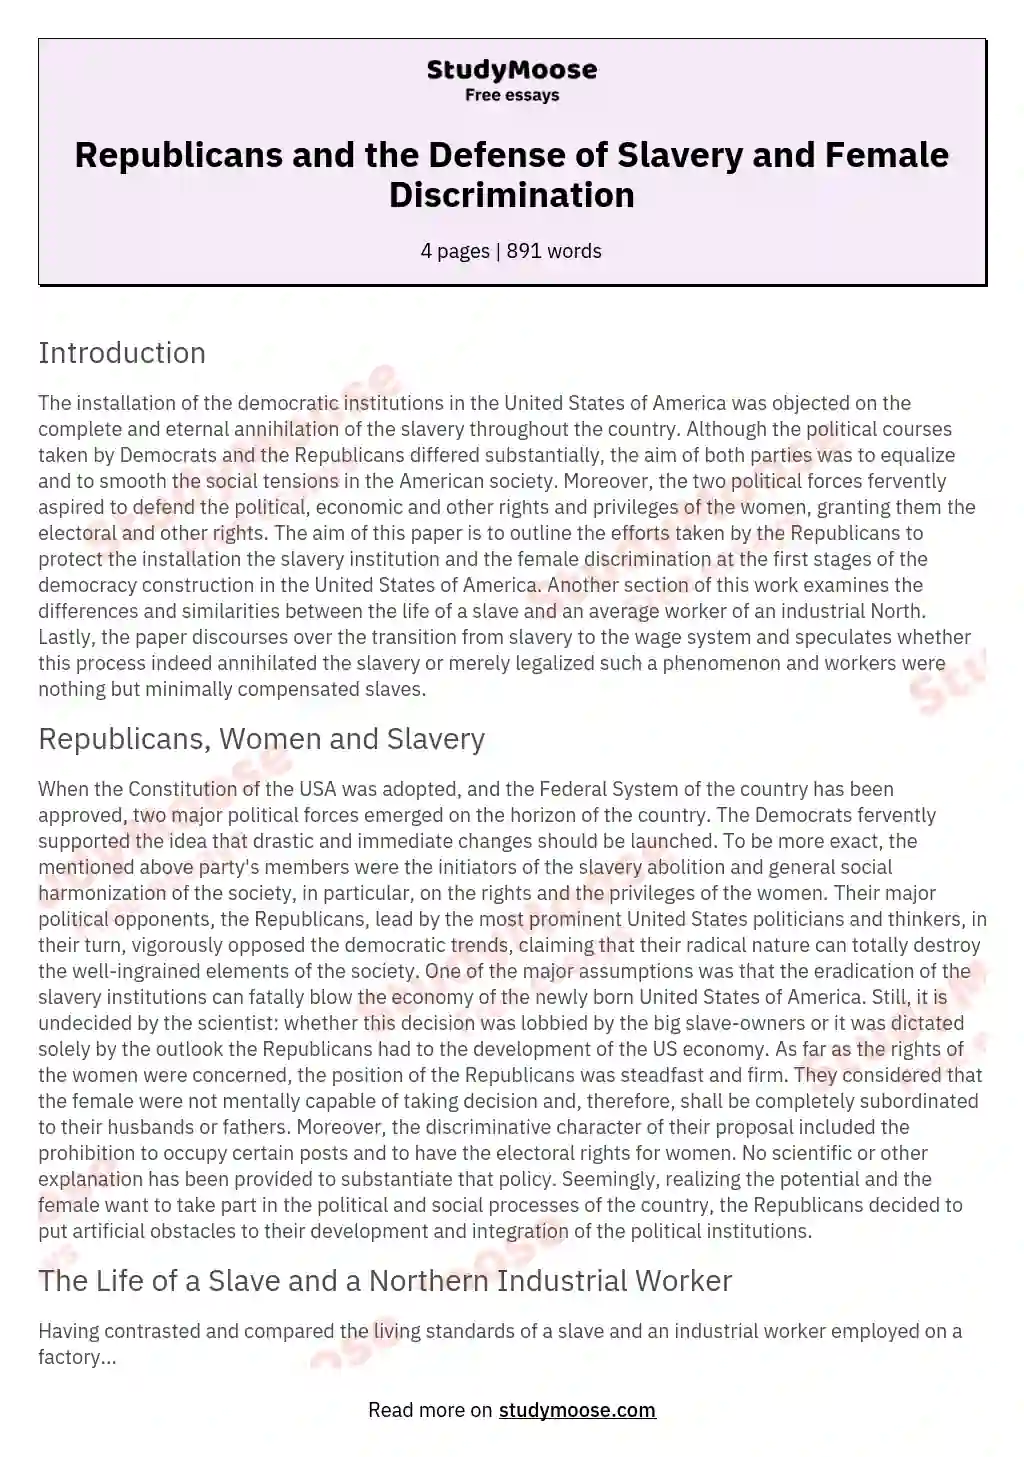 Republicans and the Defense of Slavery and Female Discrimination essay